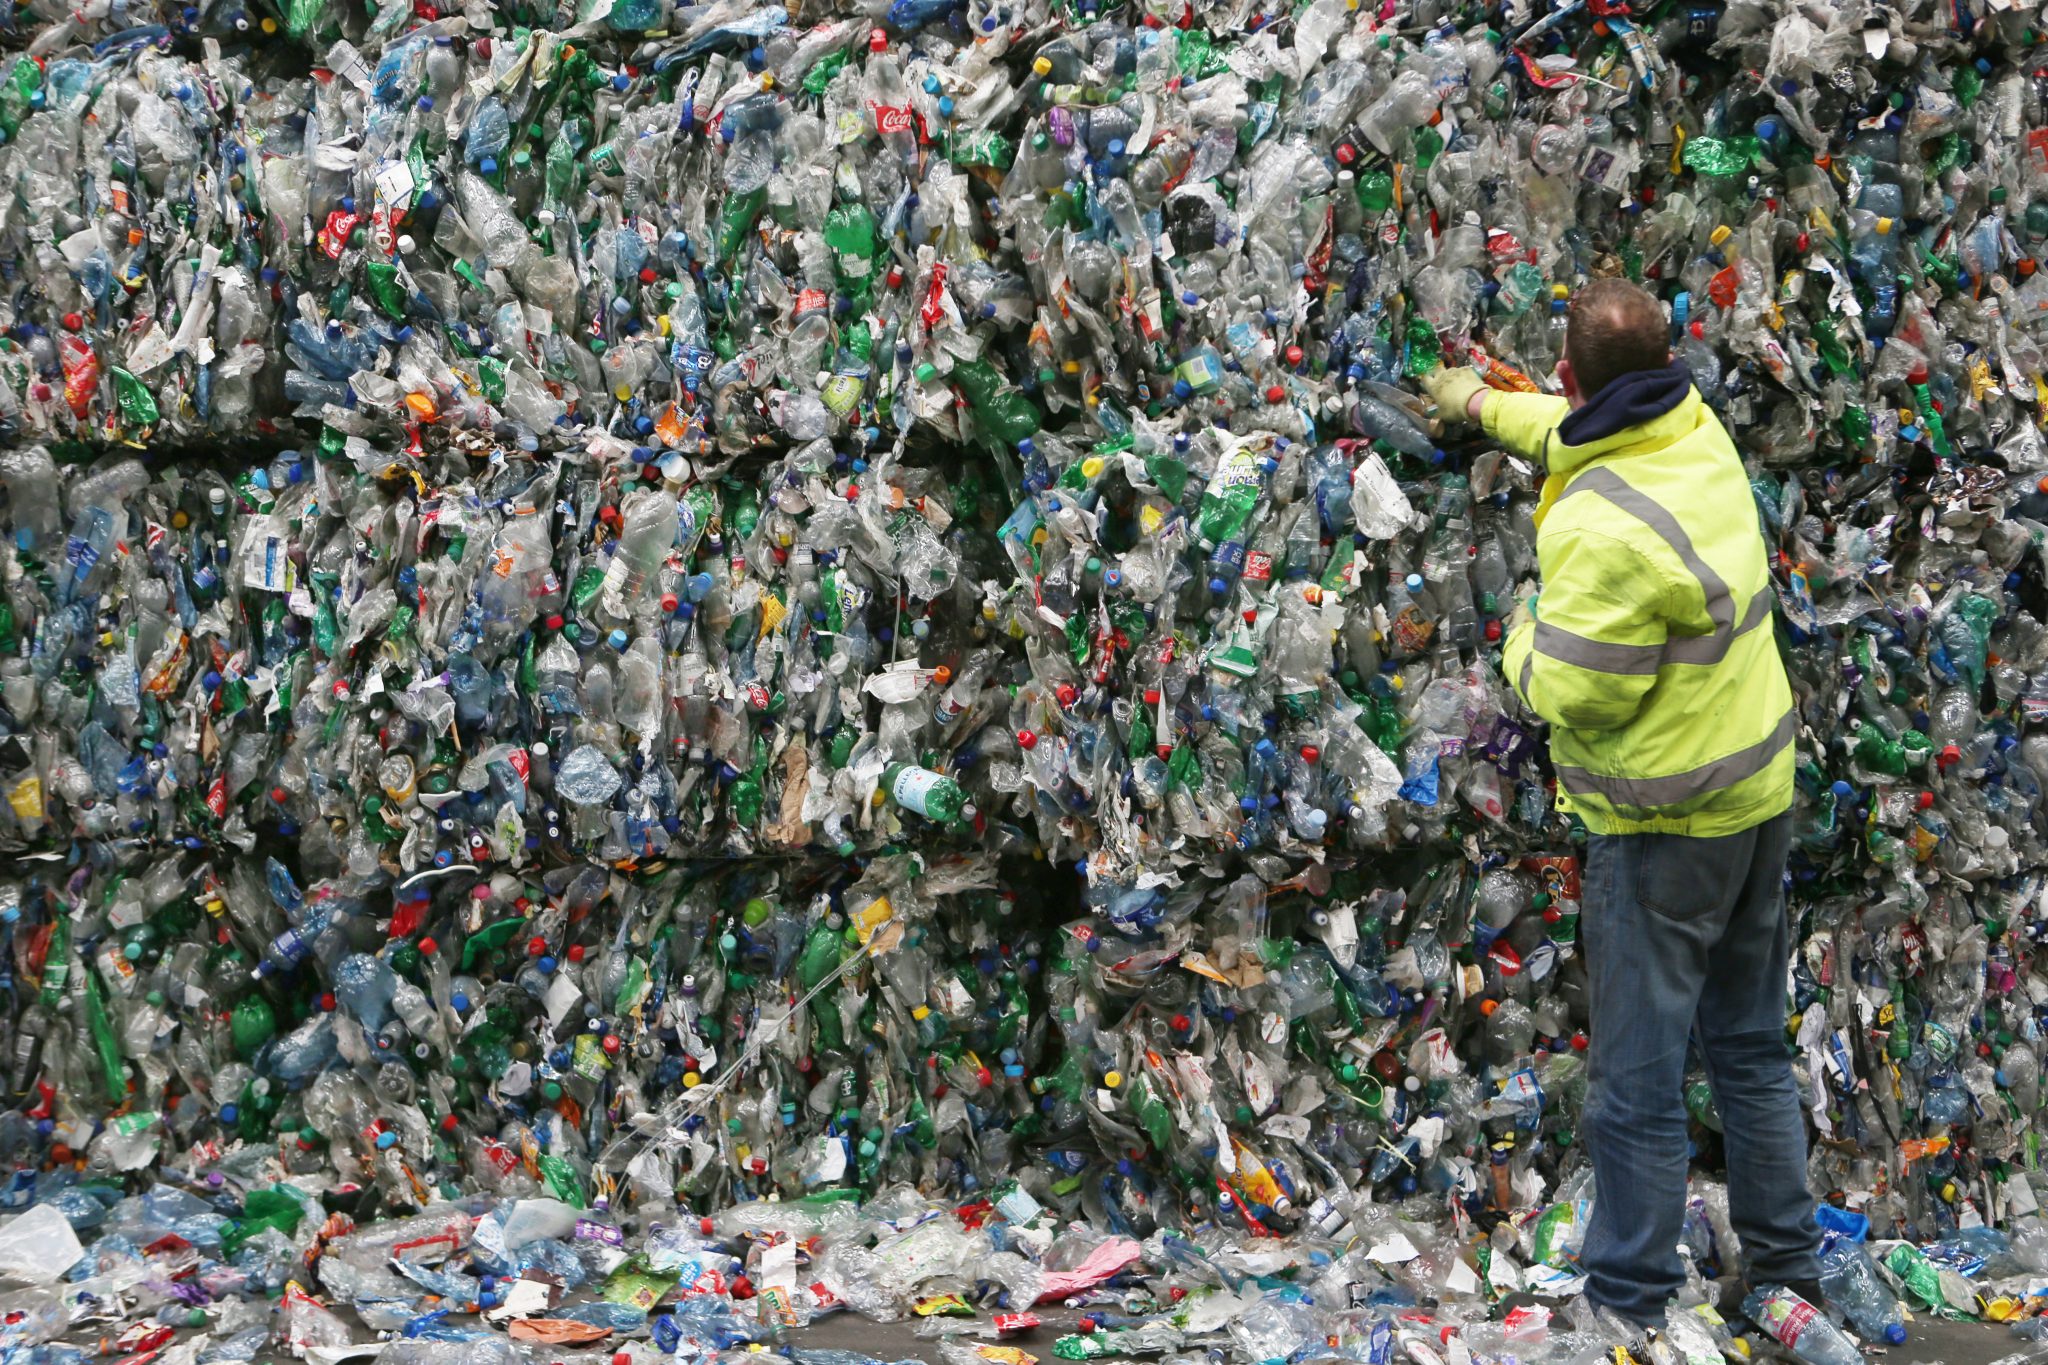 A worker checks the mountains of plastic bottles compressed into blocks at the Panda Recycling plant in Dublin, 30-04-2018. Image: RollingNews